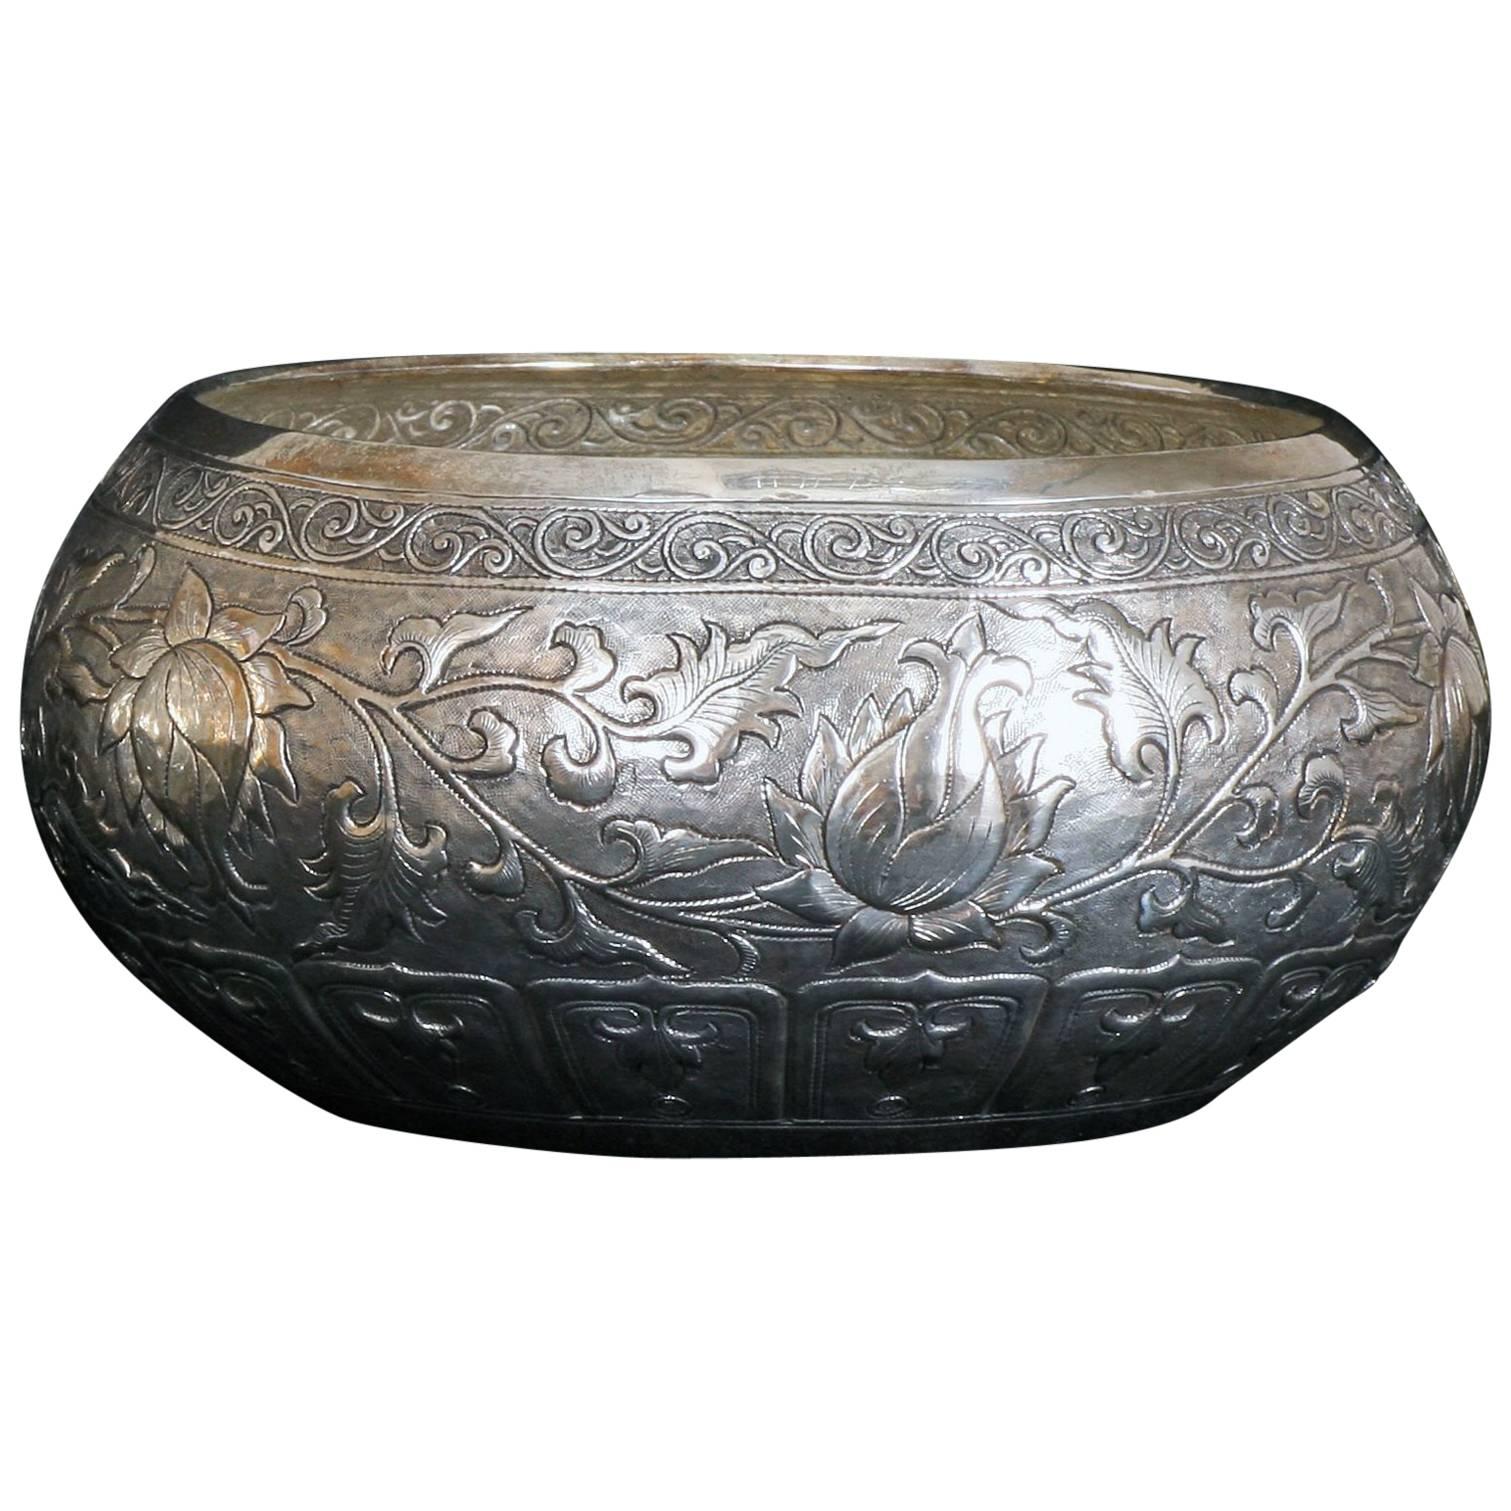 Contemporary Hand-Worked Solid Silver Bowl, Chinese Floral Motif, Centerpiece